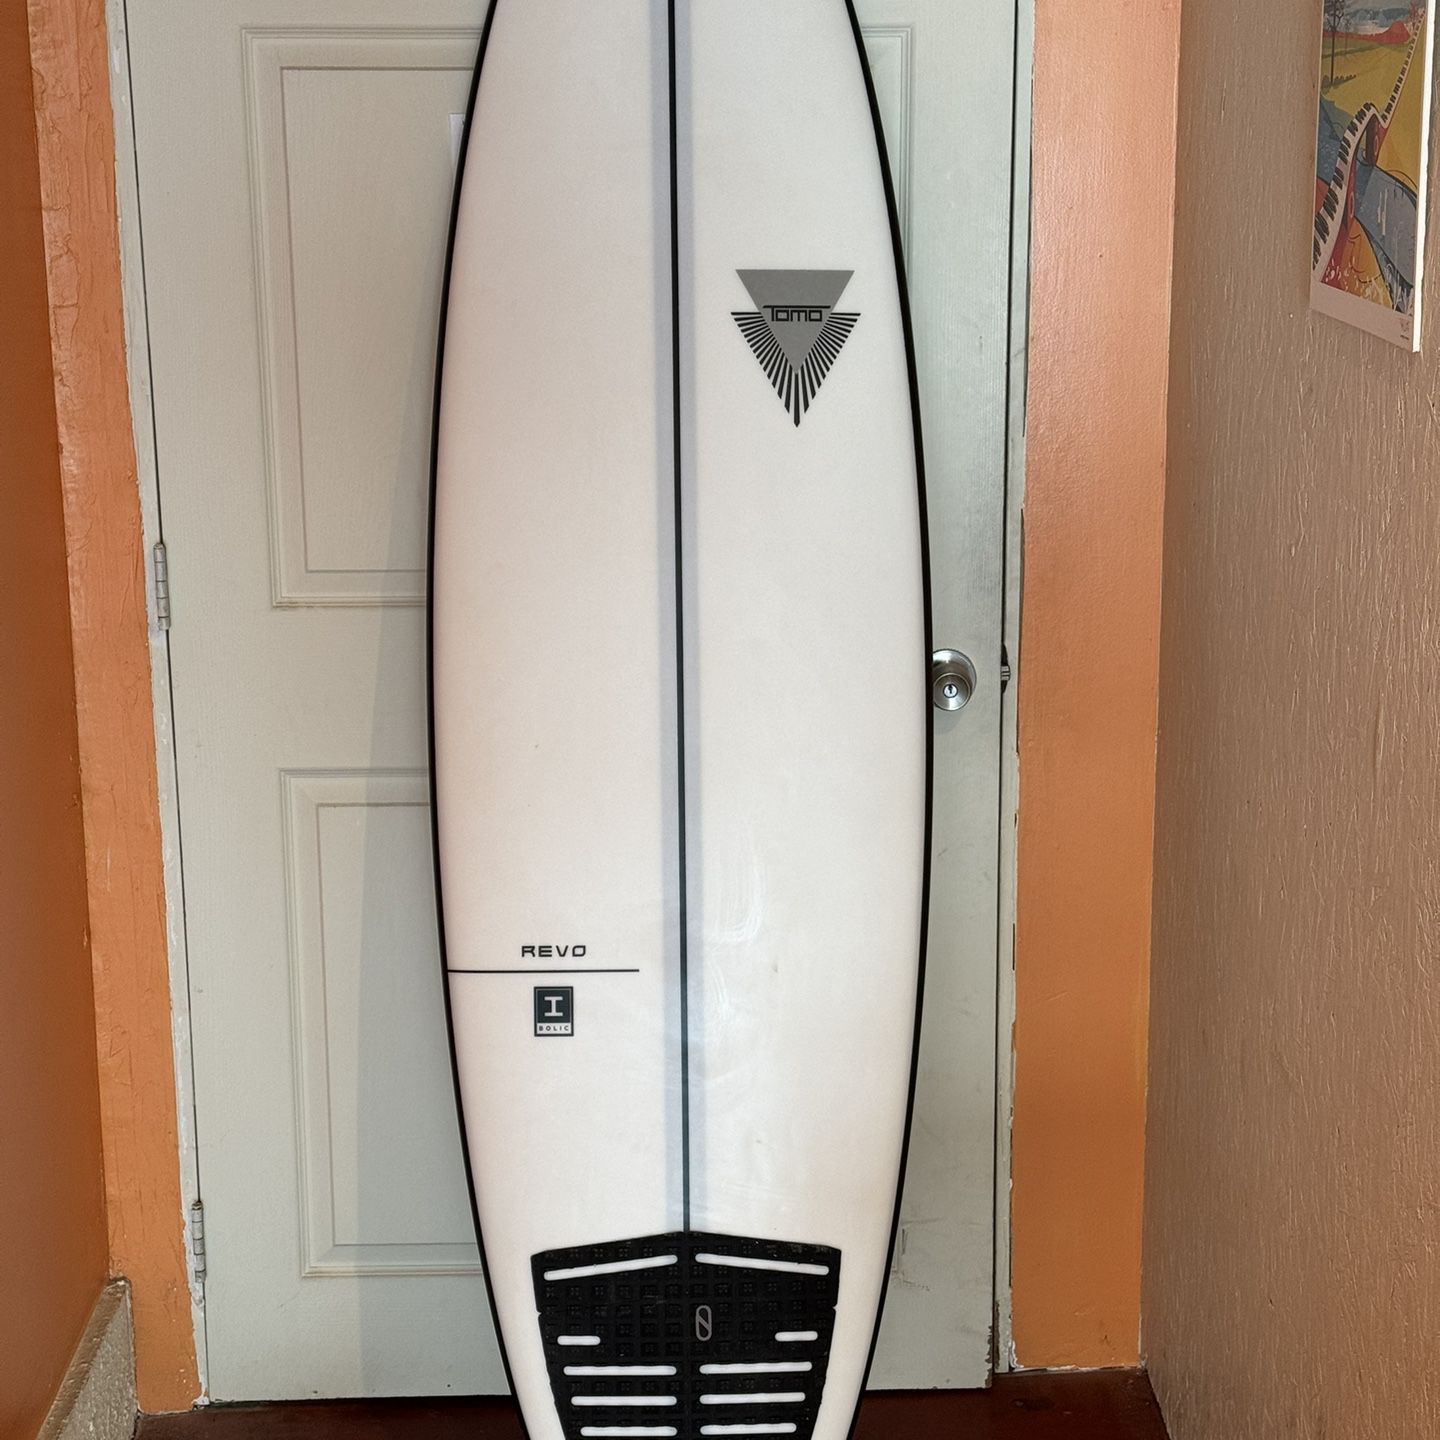 Tomo Surfboard For Sale - Like New